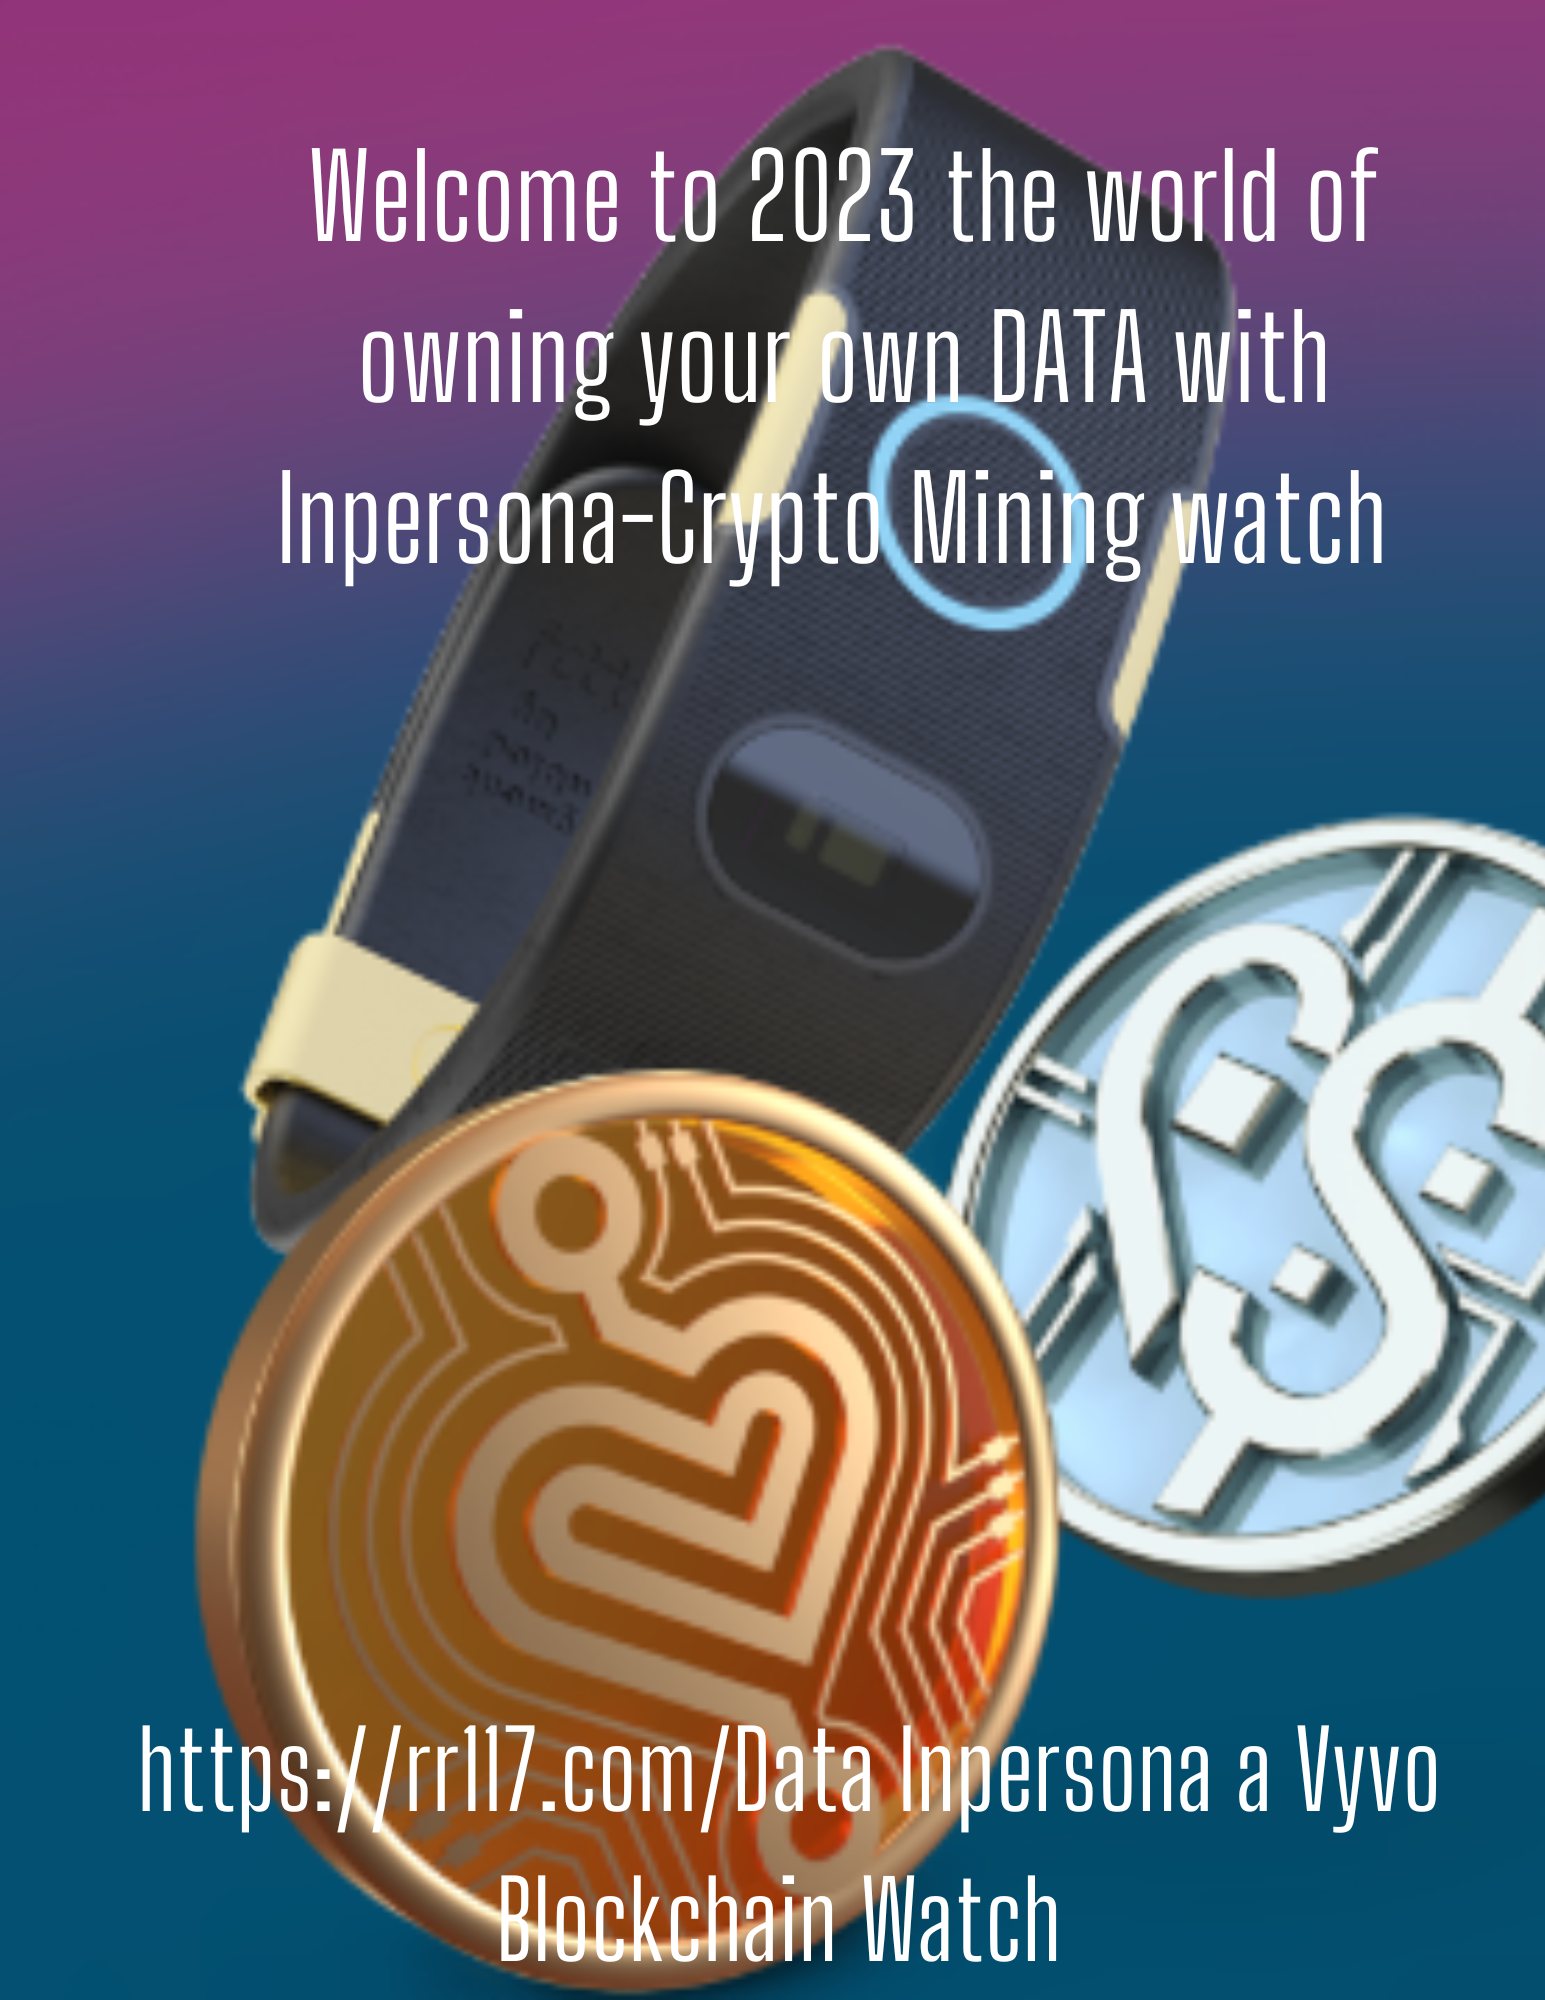 Data privacy and security Inpersona and Helo come together with Vyvo on the Blockchain 